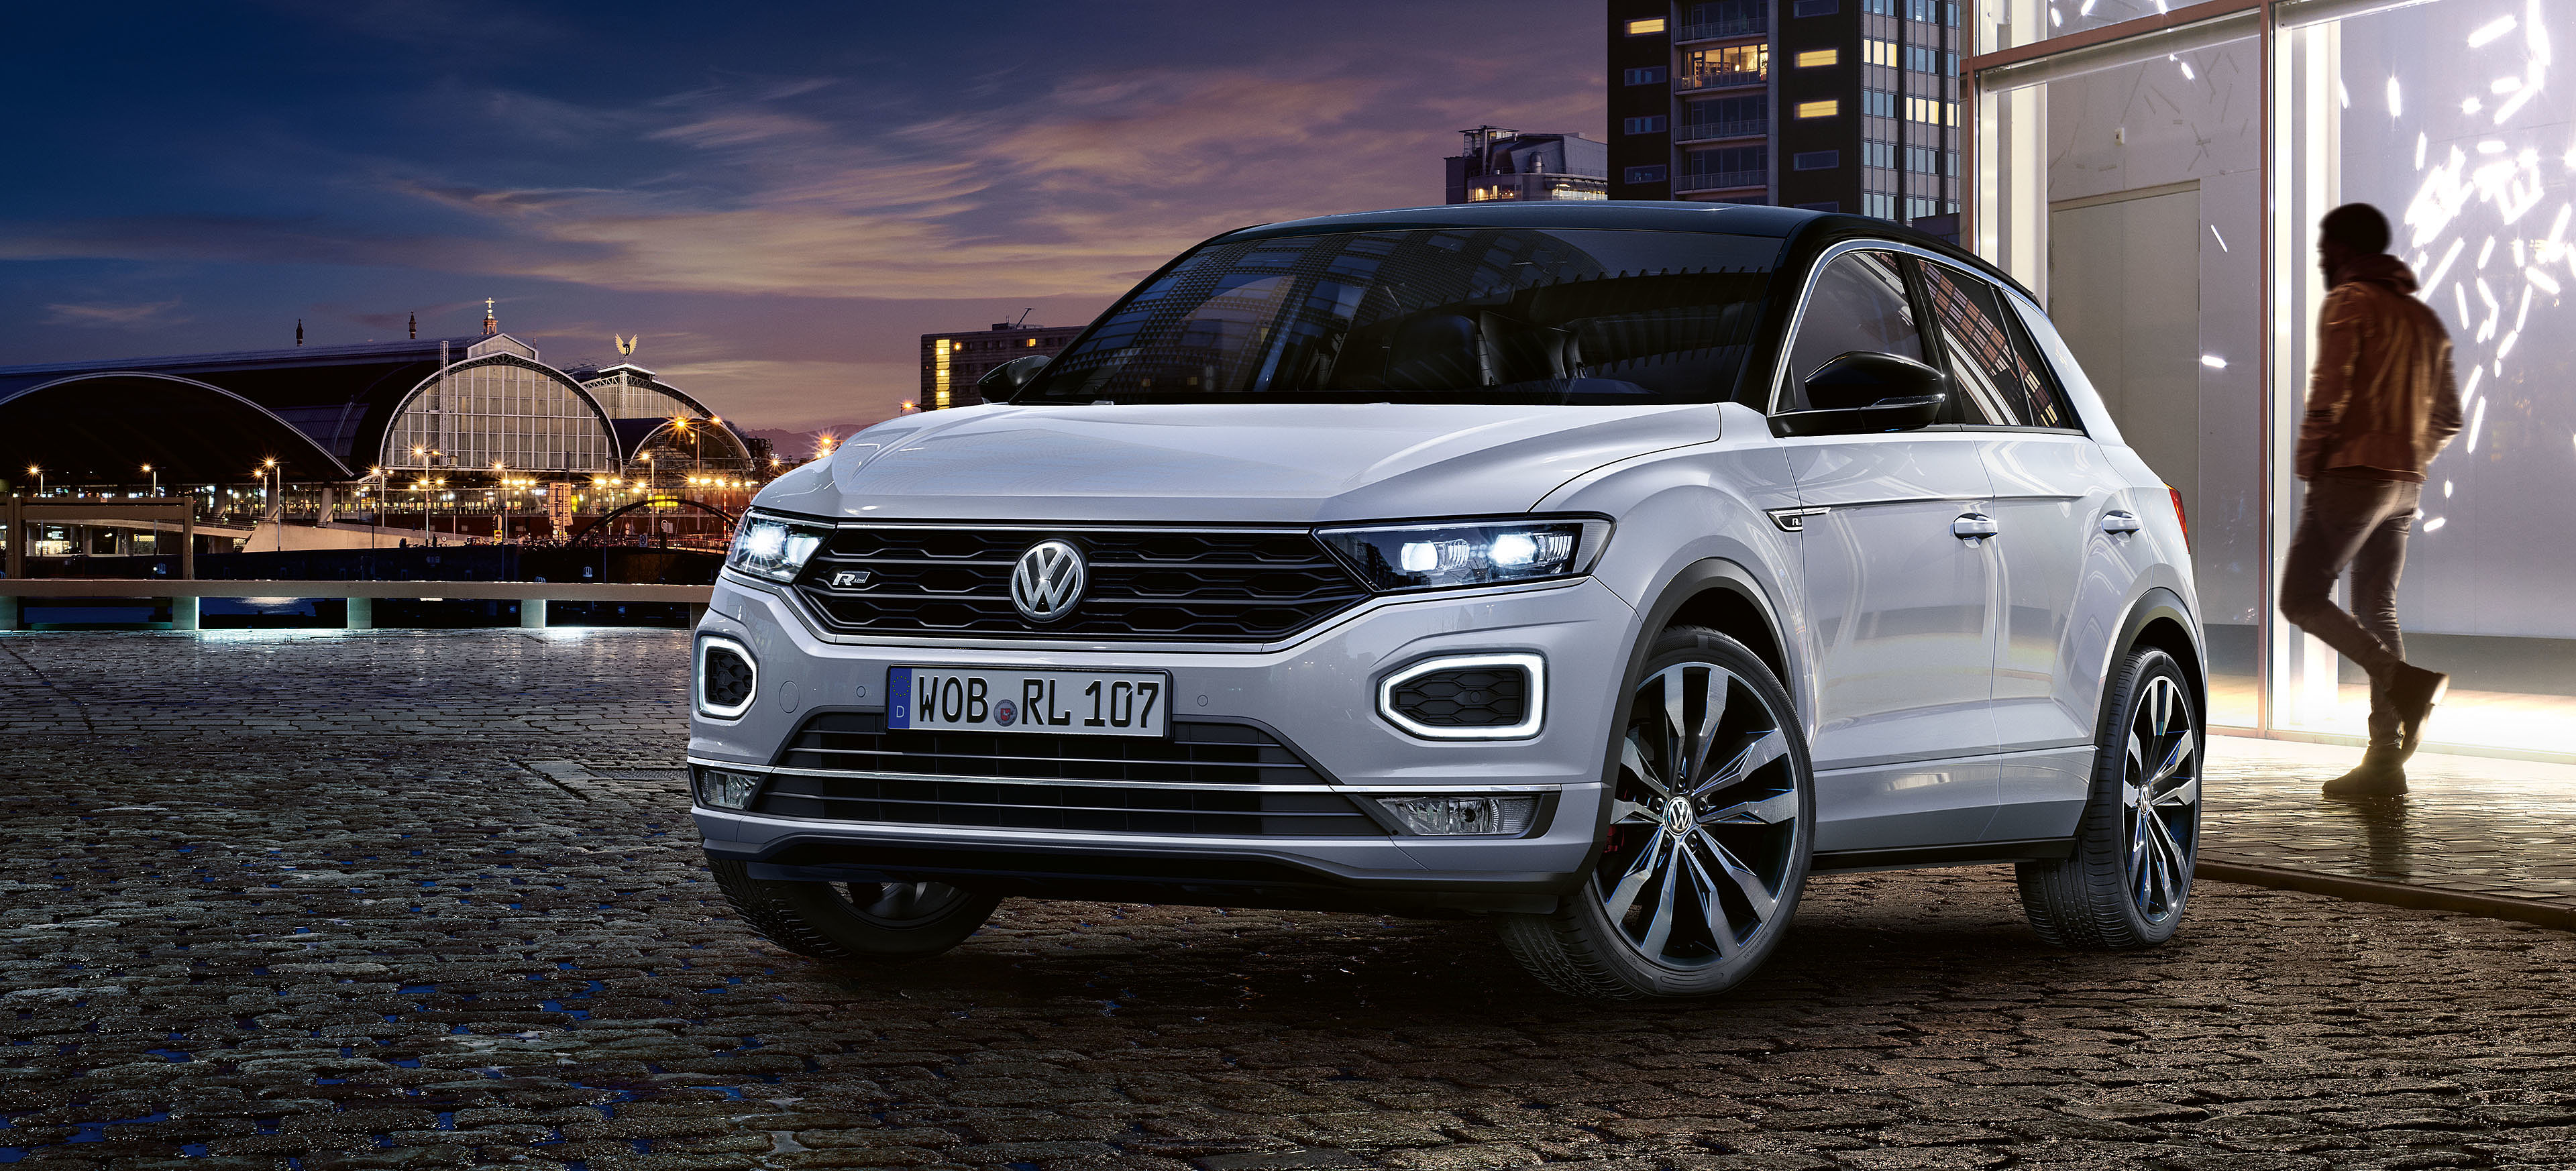 VW T-Roc R-Line Leasing-Angebote ohne Anzahlung